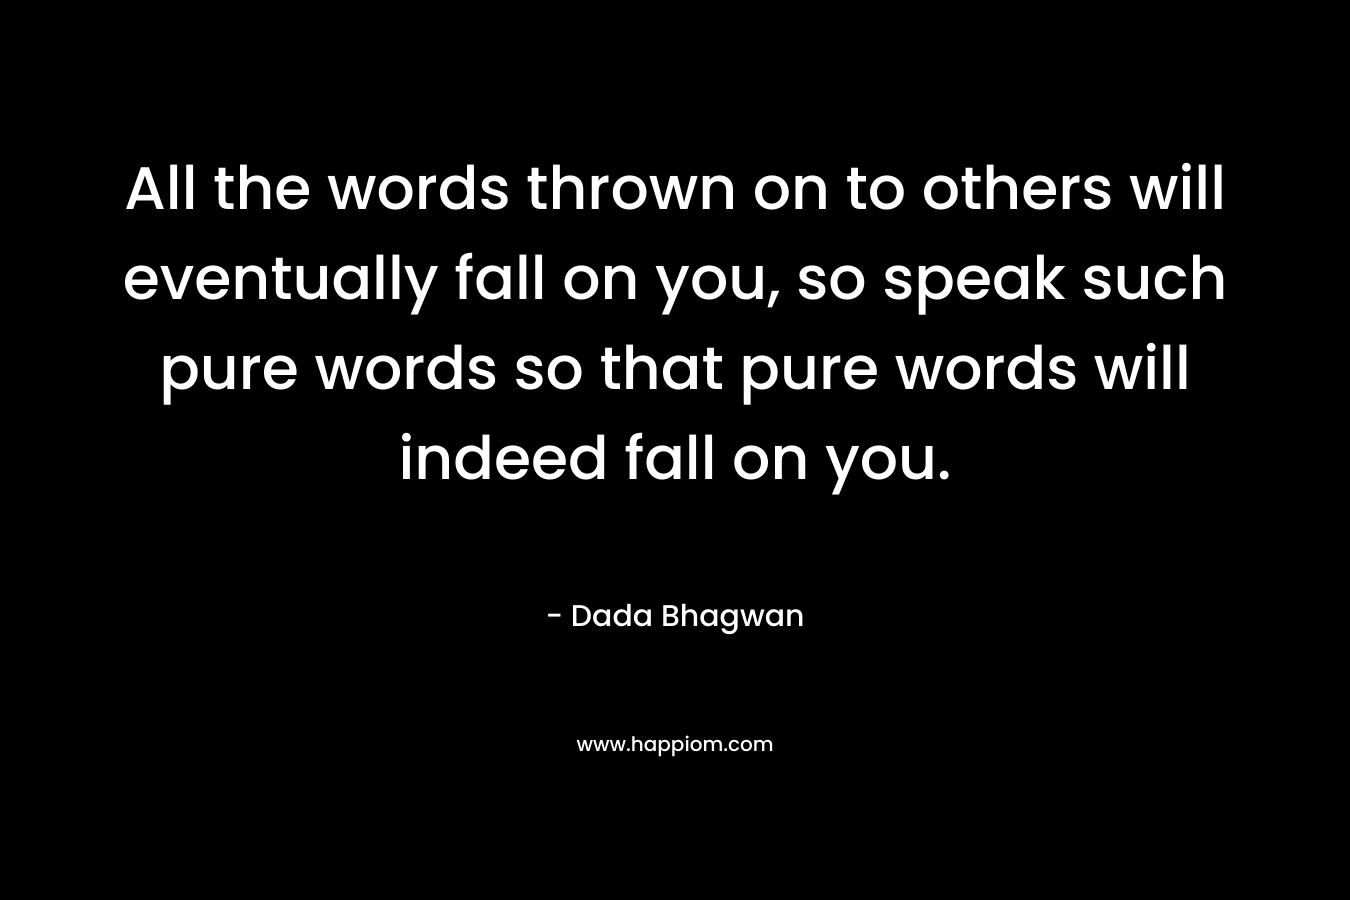 All the words thrown on to others will eventually fall on you, so speak such pure words so that pure words will indeed fall on you.